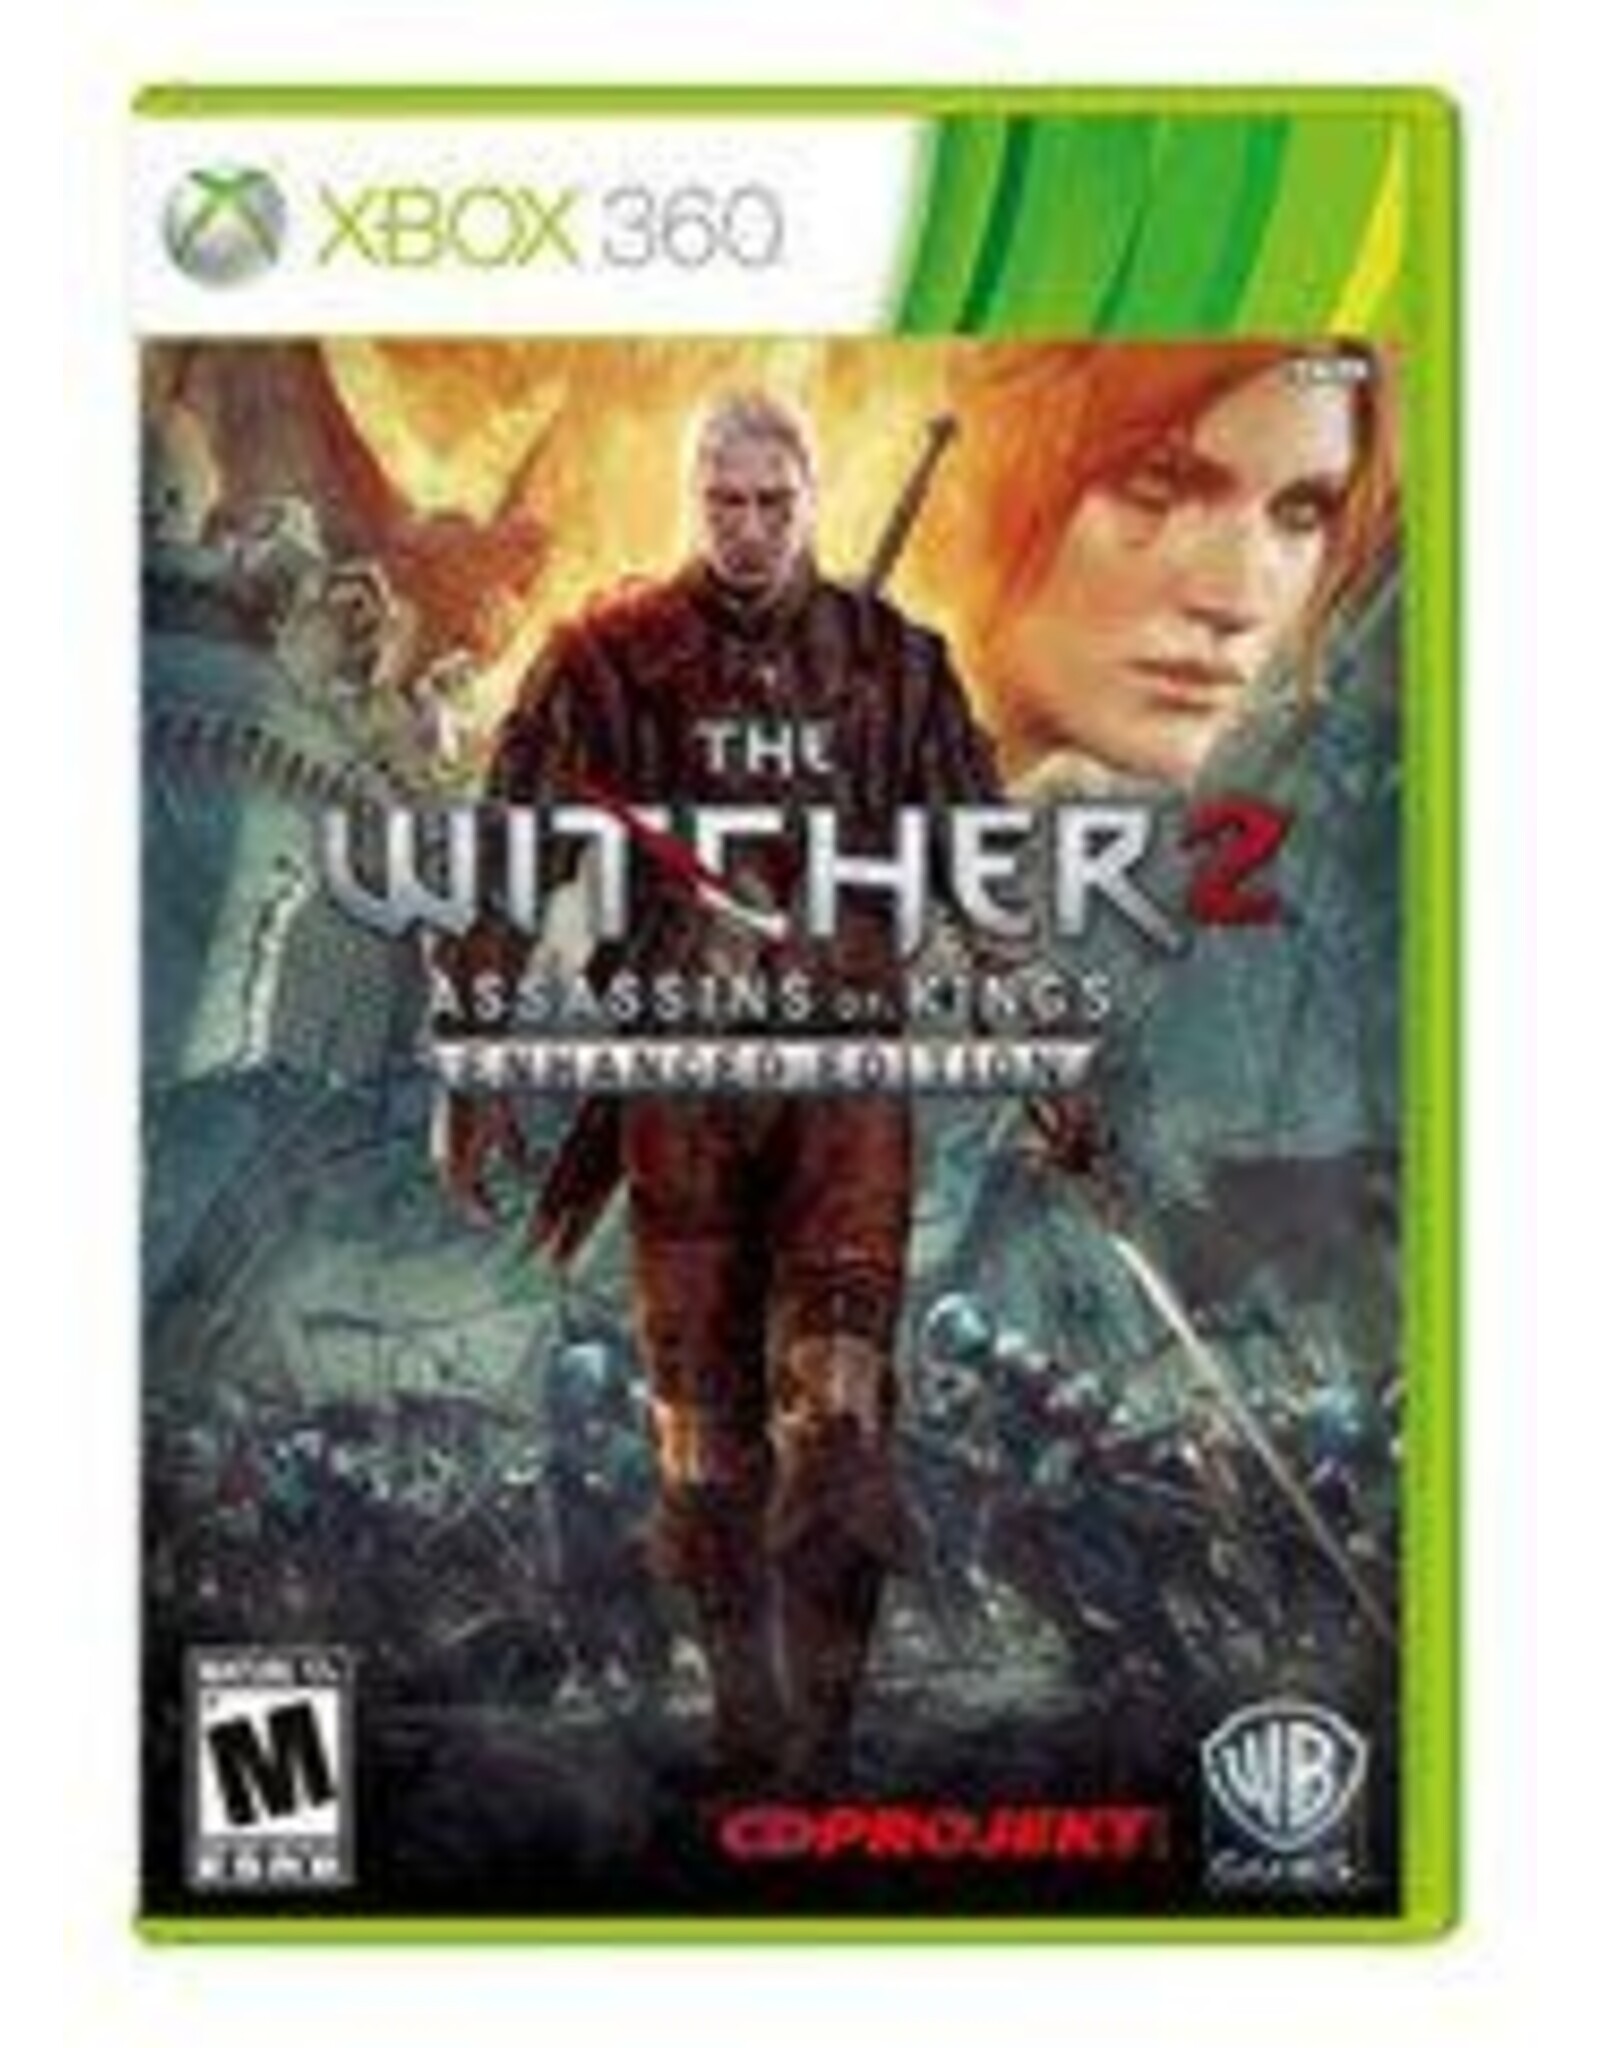 Xbox 360 Witcher 2: Assassins of Kings Enhanced Edition (Brand New)